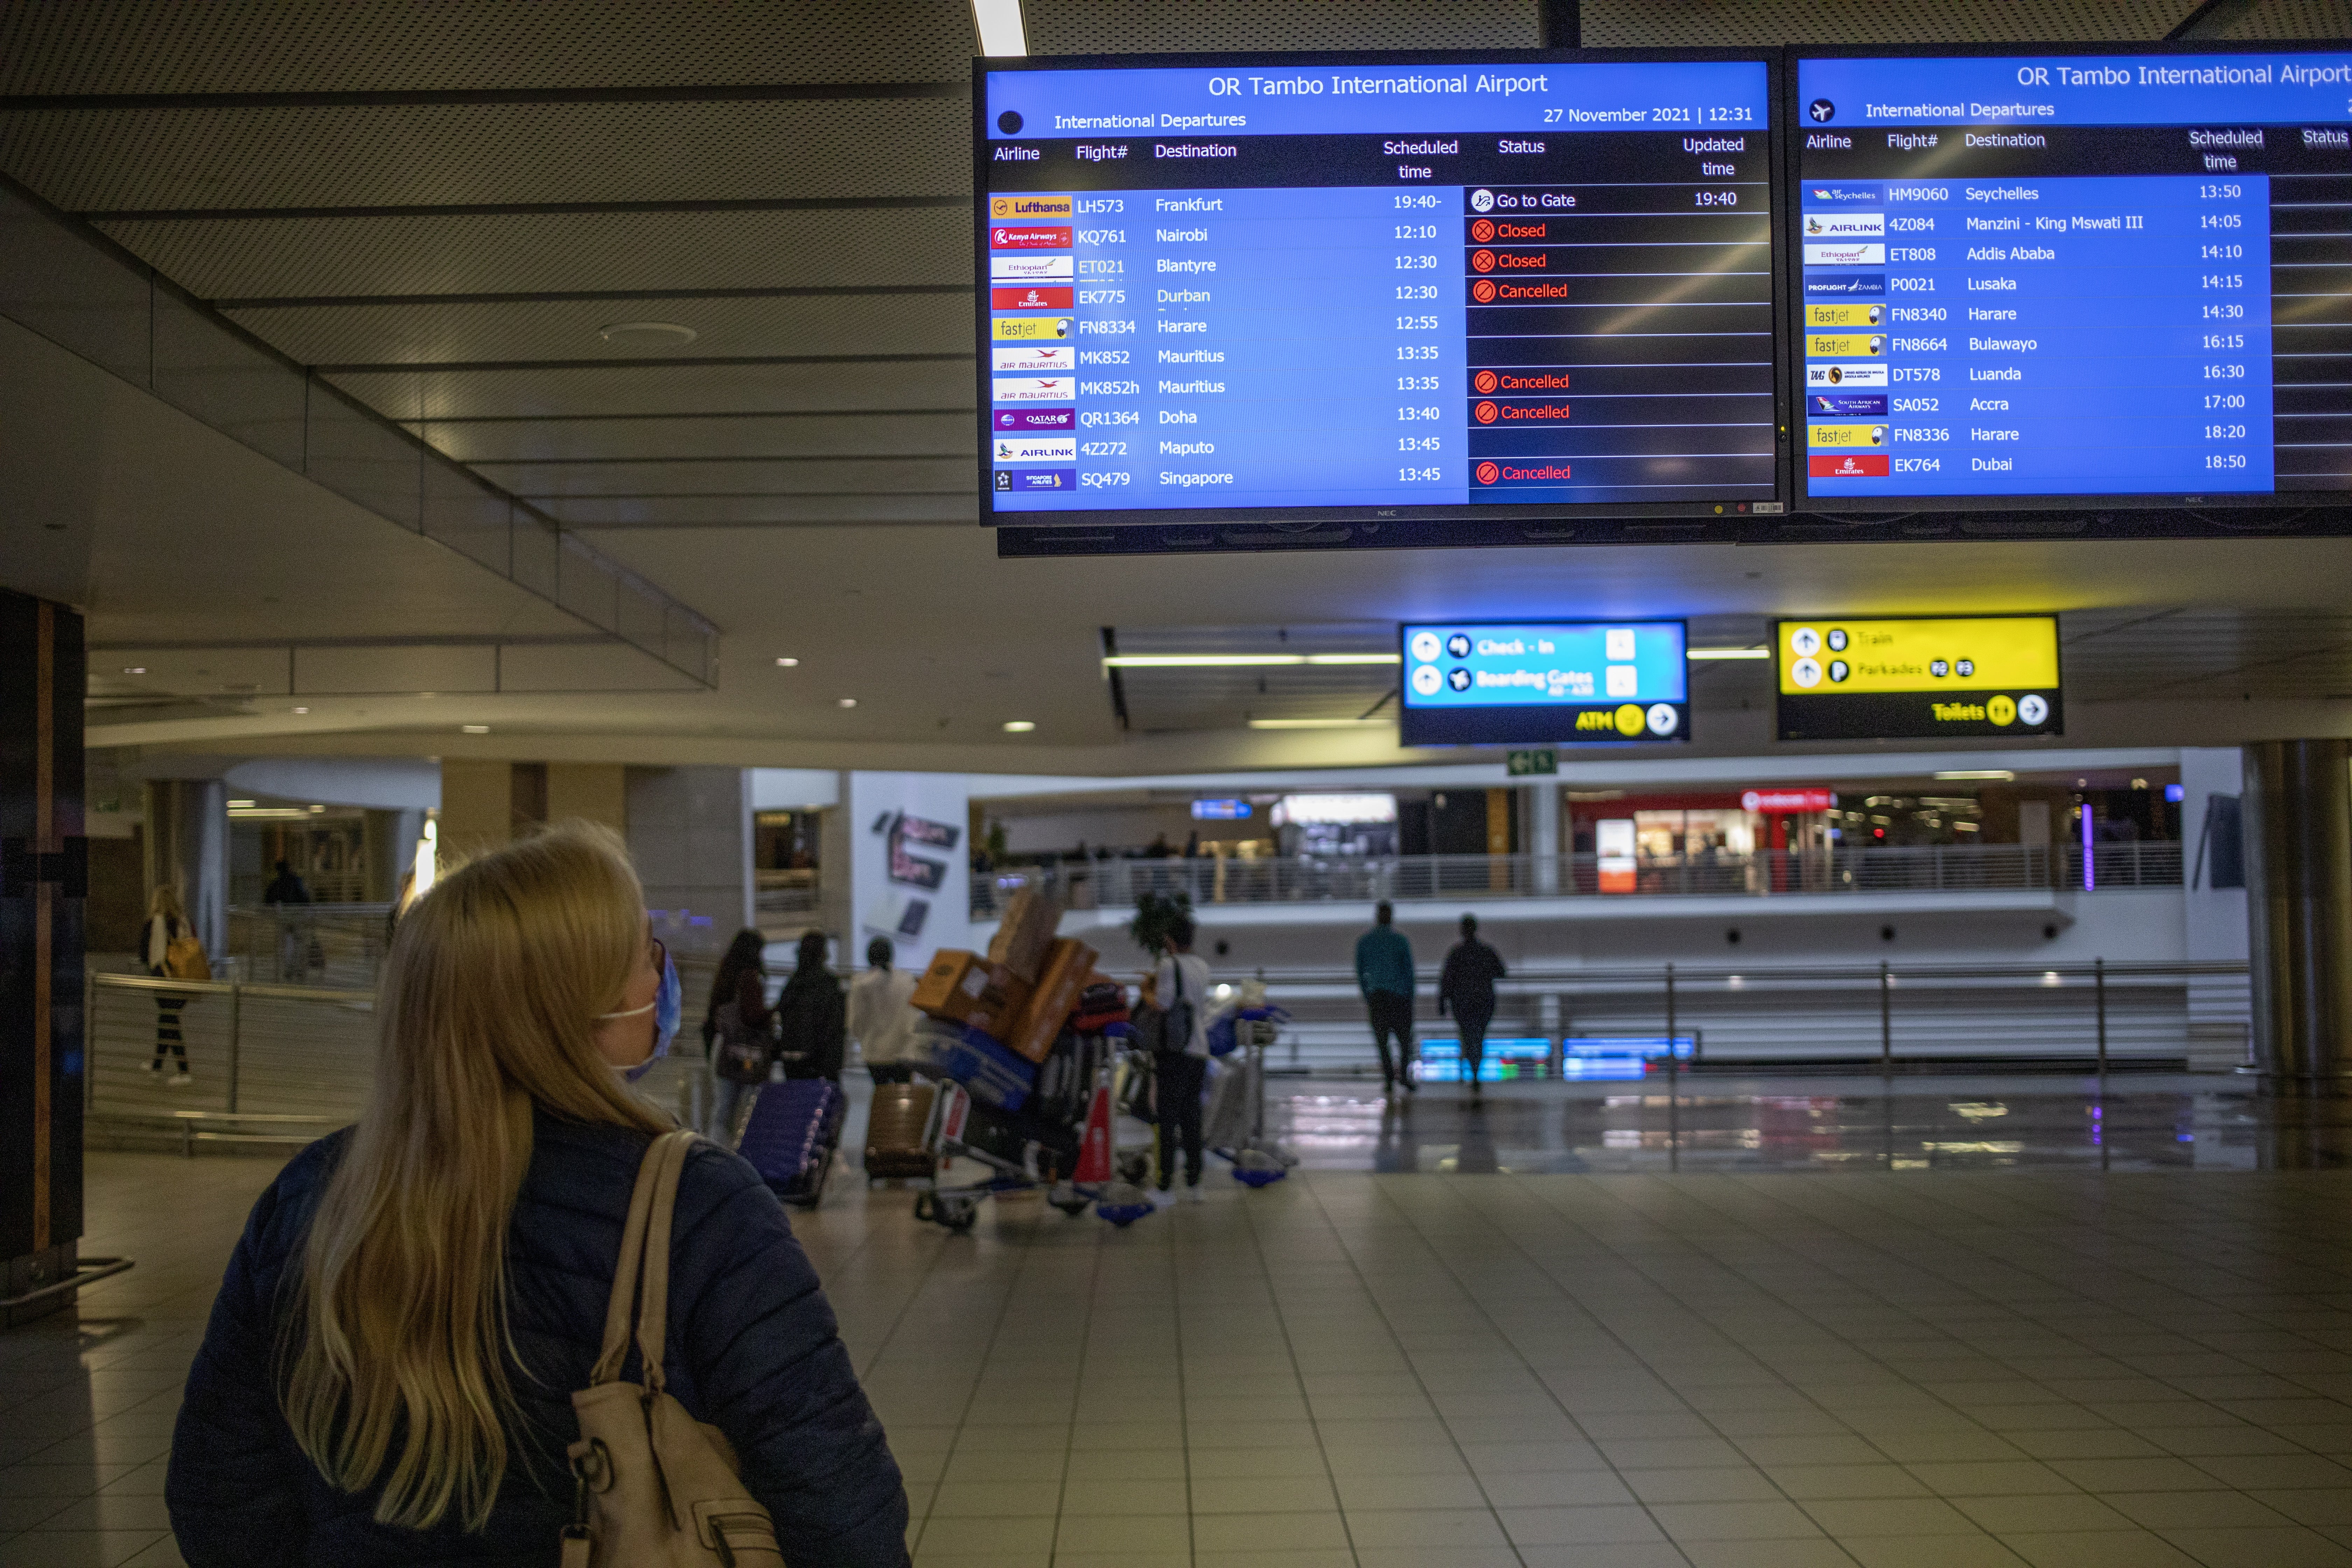 An information board shows canceled flights at OR Thambo International Airport in Johannesburg